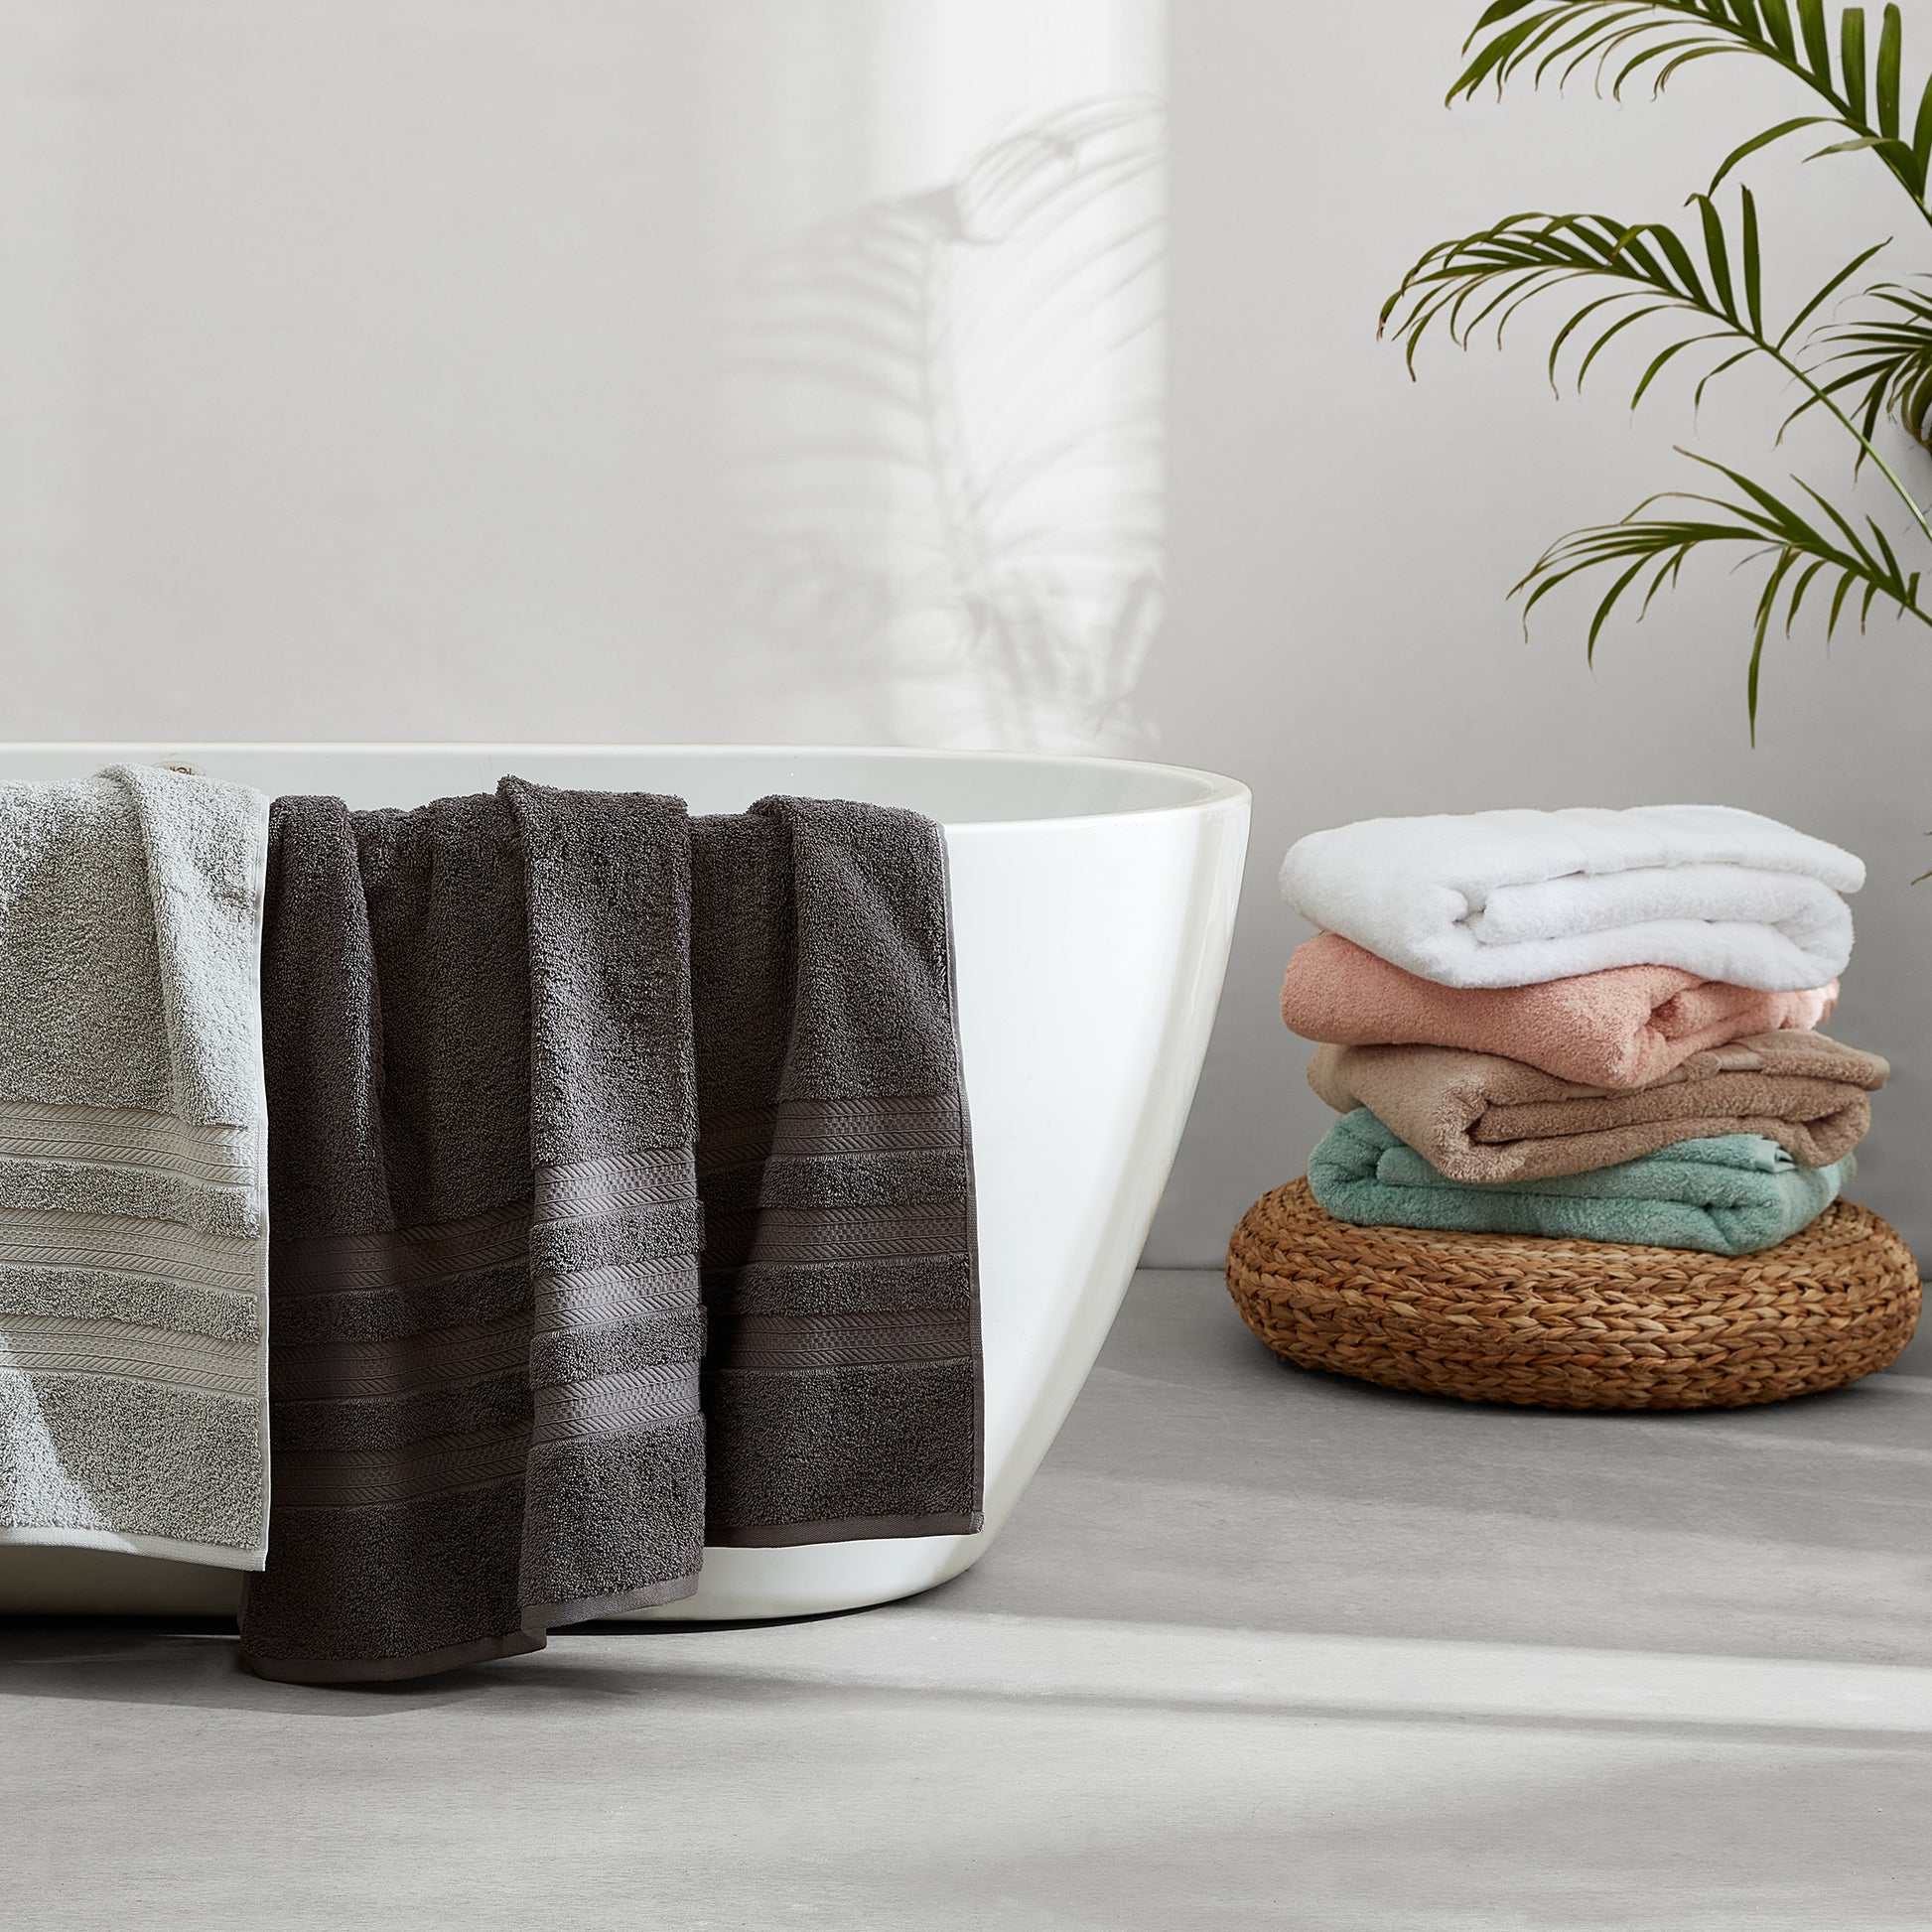 TOWEL Aims to Make the Perfect Plus Size Bath Towel